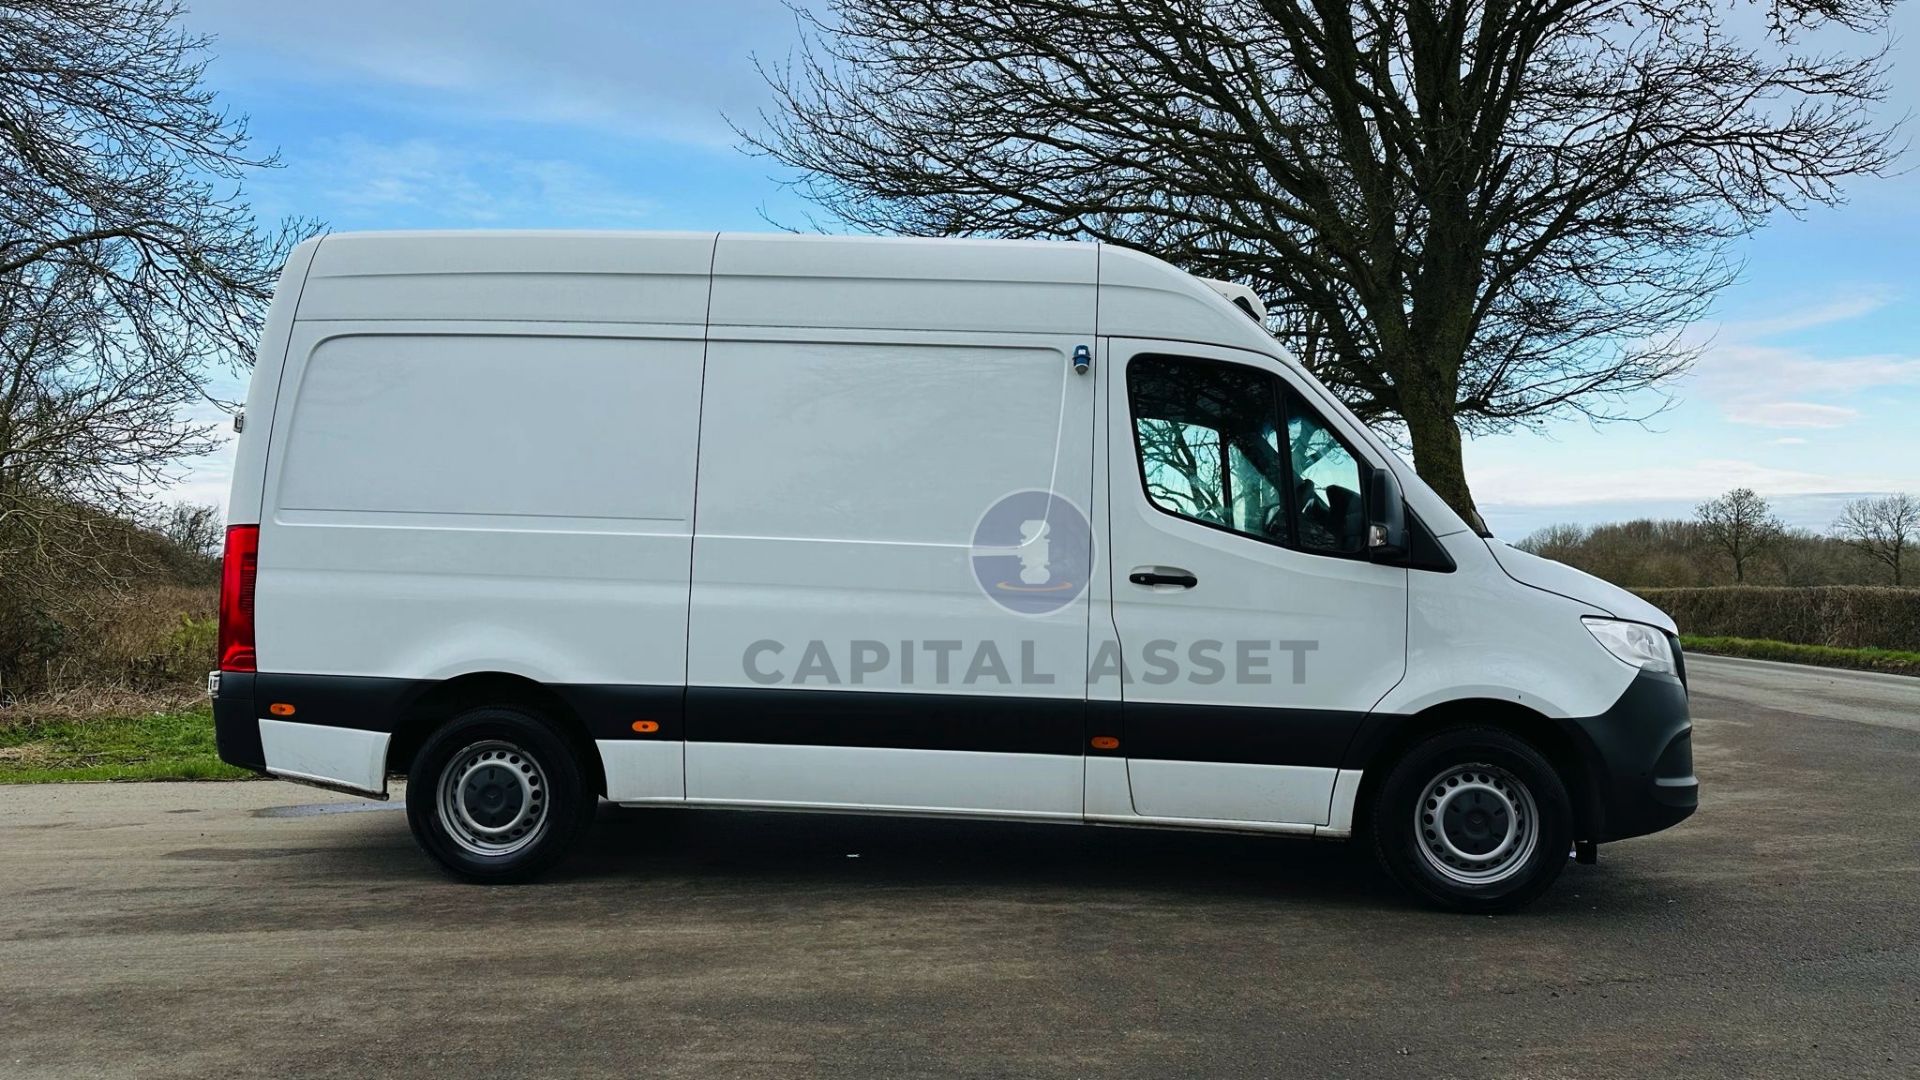 MERCEDES-BENZ SPRINTER 314 CDI *MWB - REFRIGERATED VAN* (2019 - FACELIFT MODEL) *OVERNIGHT STANDBY* - Image 16 of 41